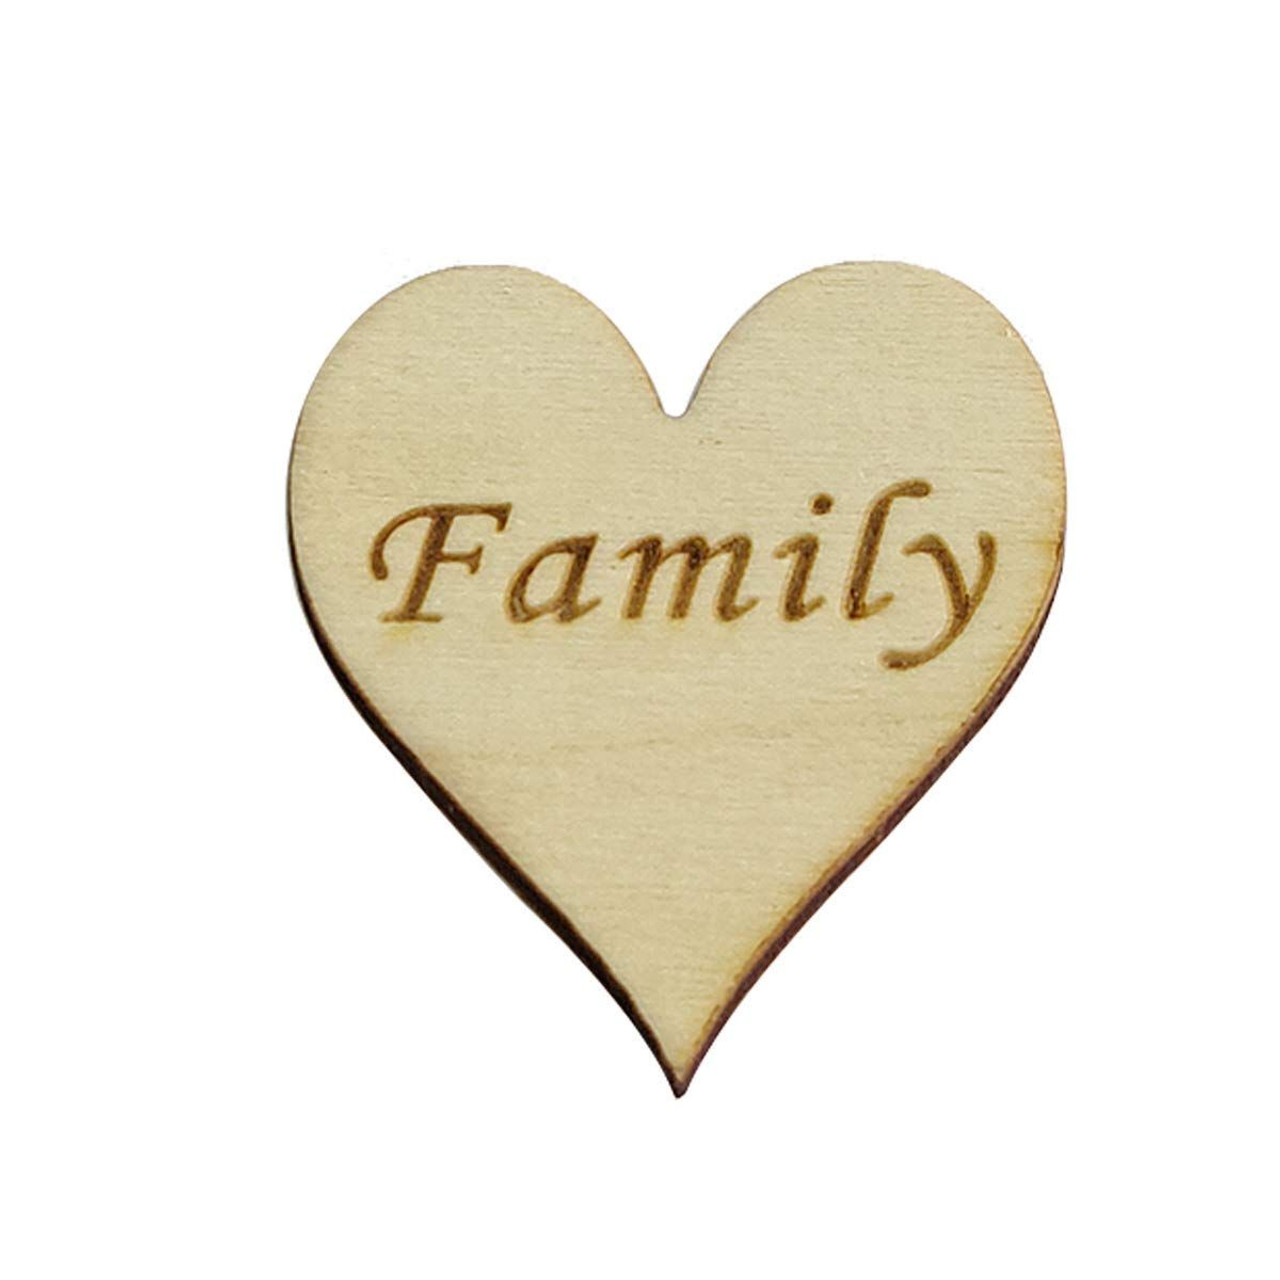 4cm Wooden Hearts Embellishment with Engraving - 5pcs, Family